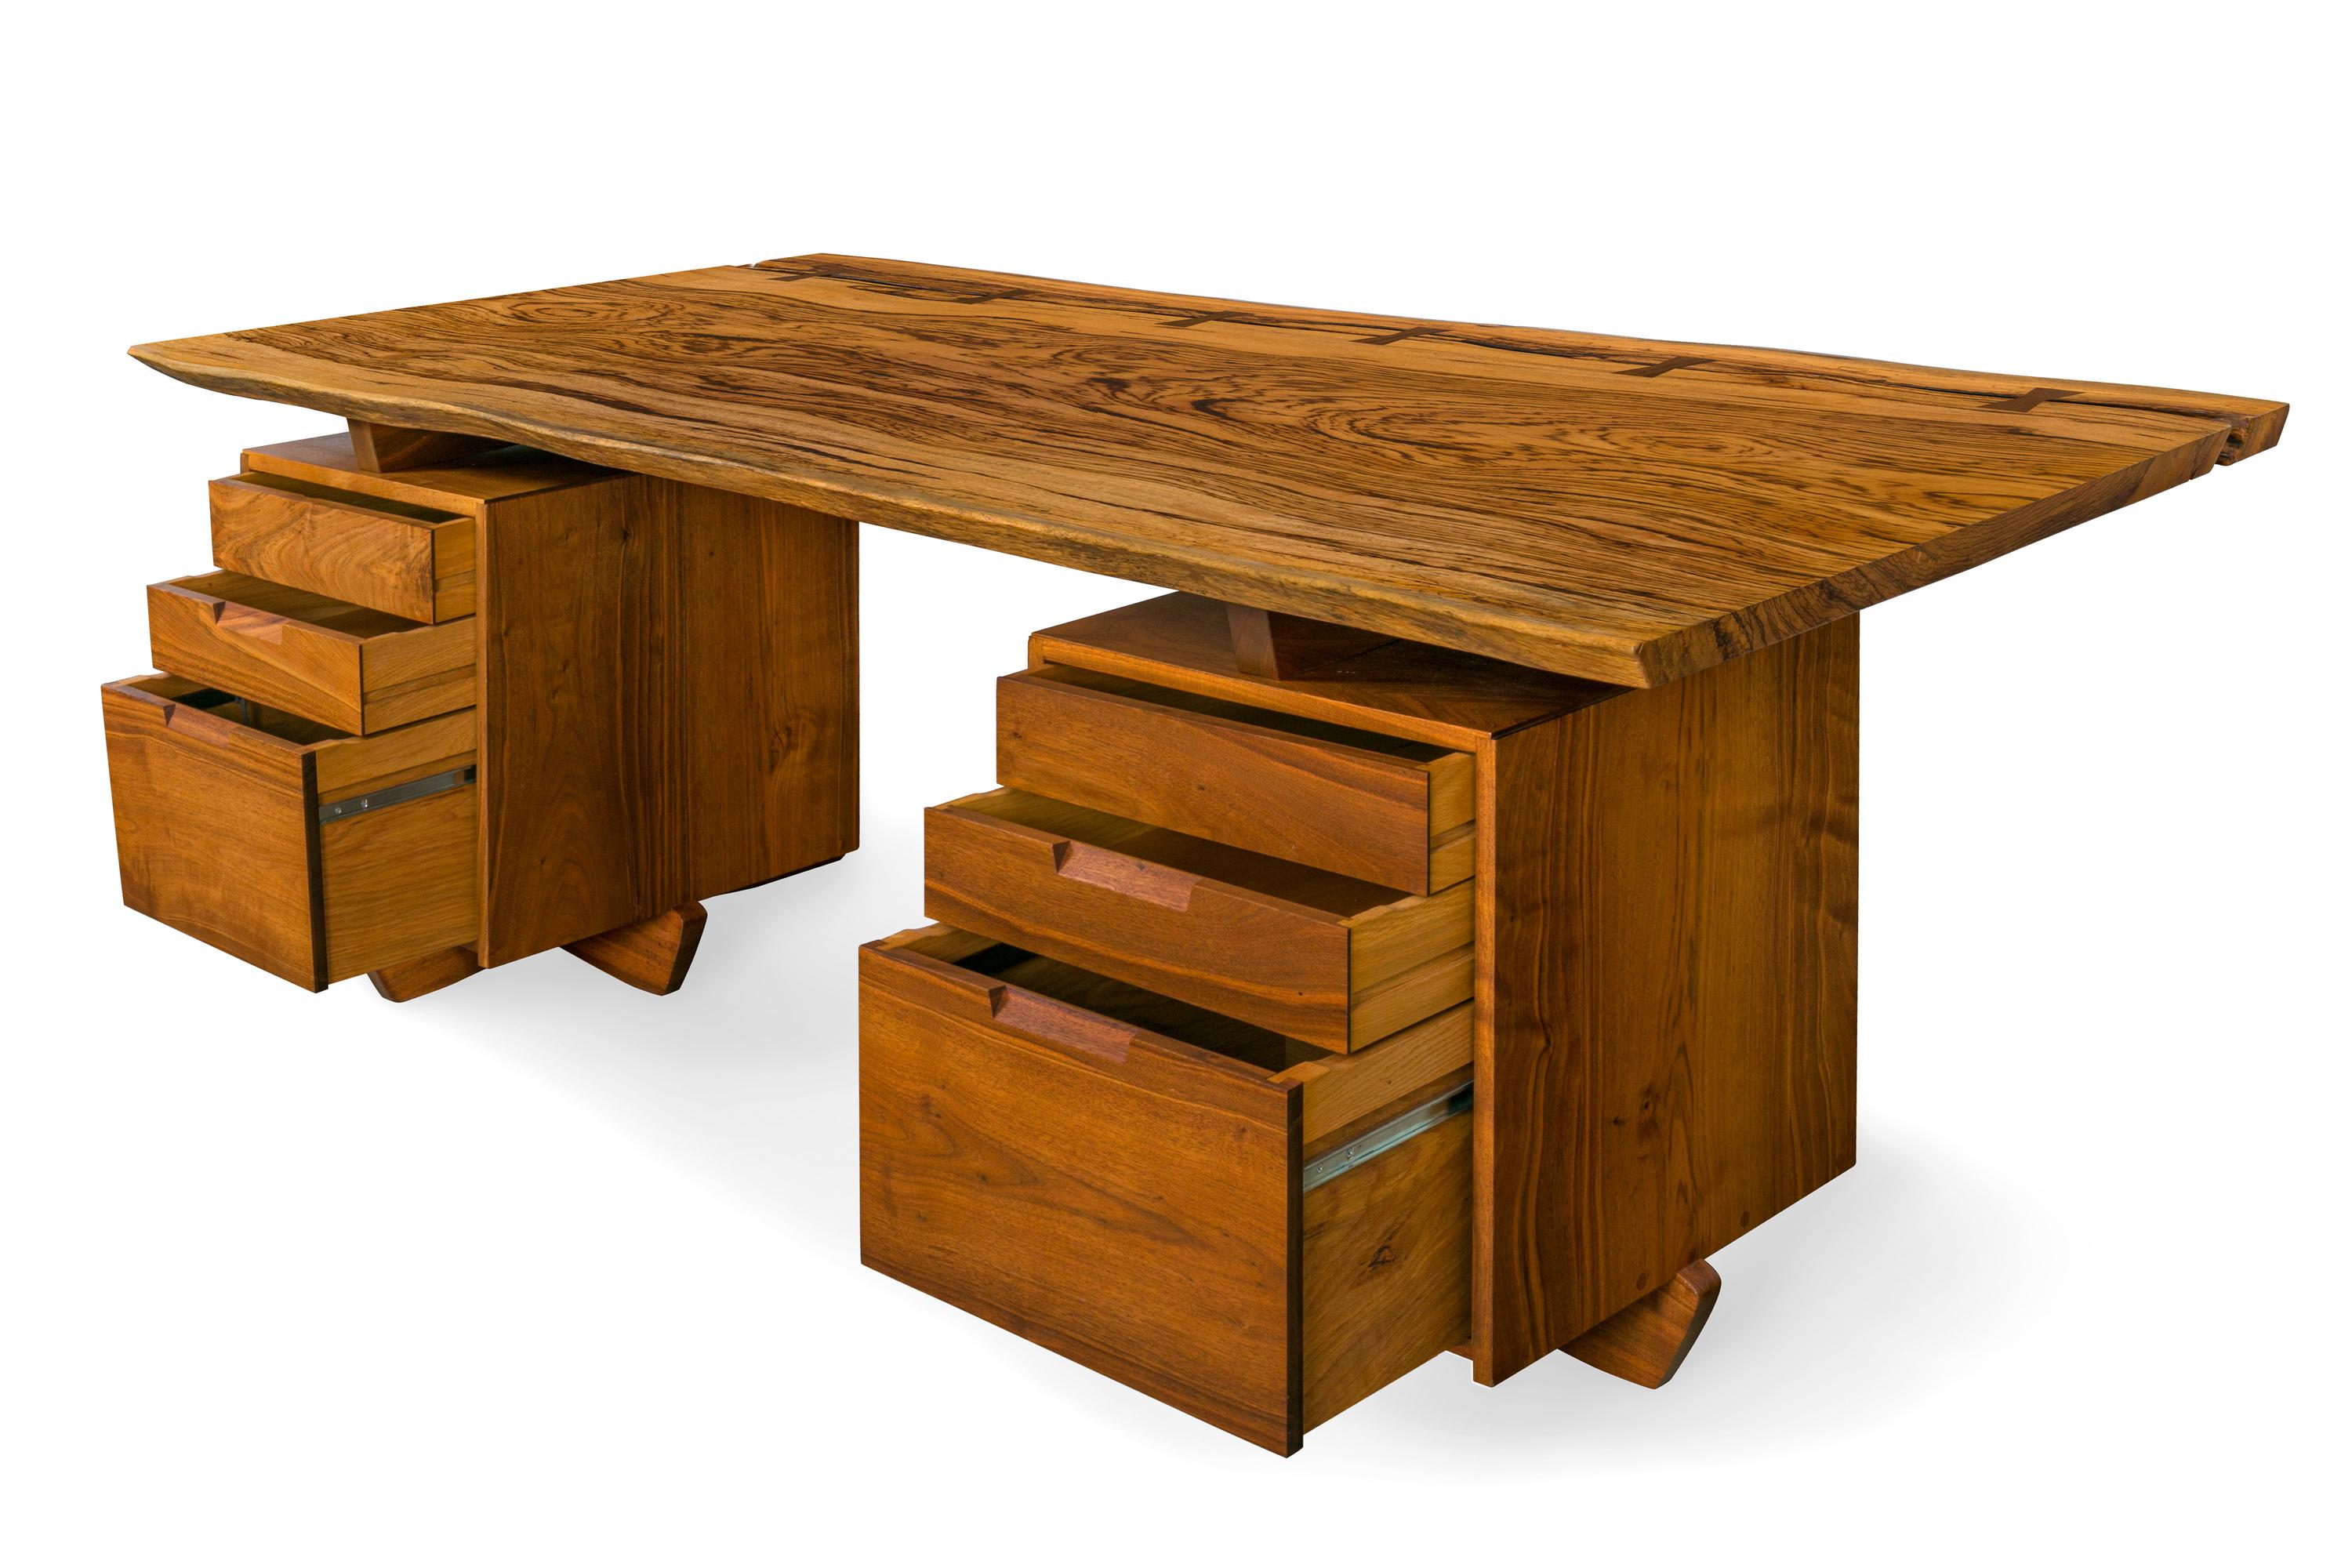 A magnificent example of George Nakashima's work. Commissioned directly from the artist by the previous owner in 1985 and executed in 1986. The desk is signed and dated by George Nakashima, July 18, 1986 with the original owner's name and dedication.